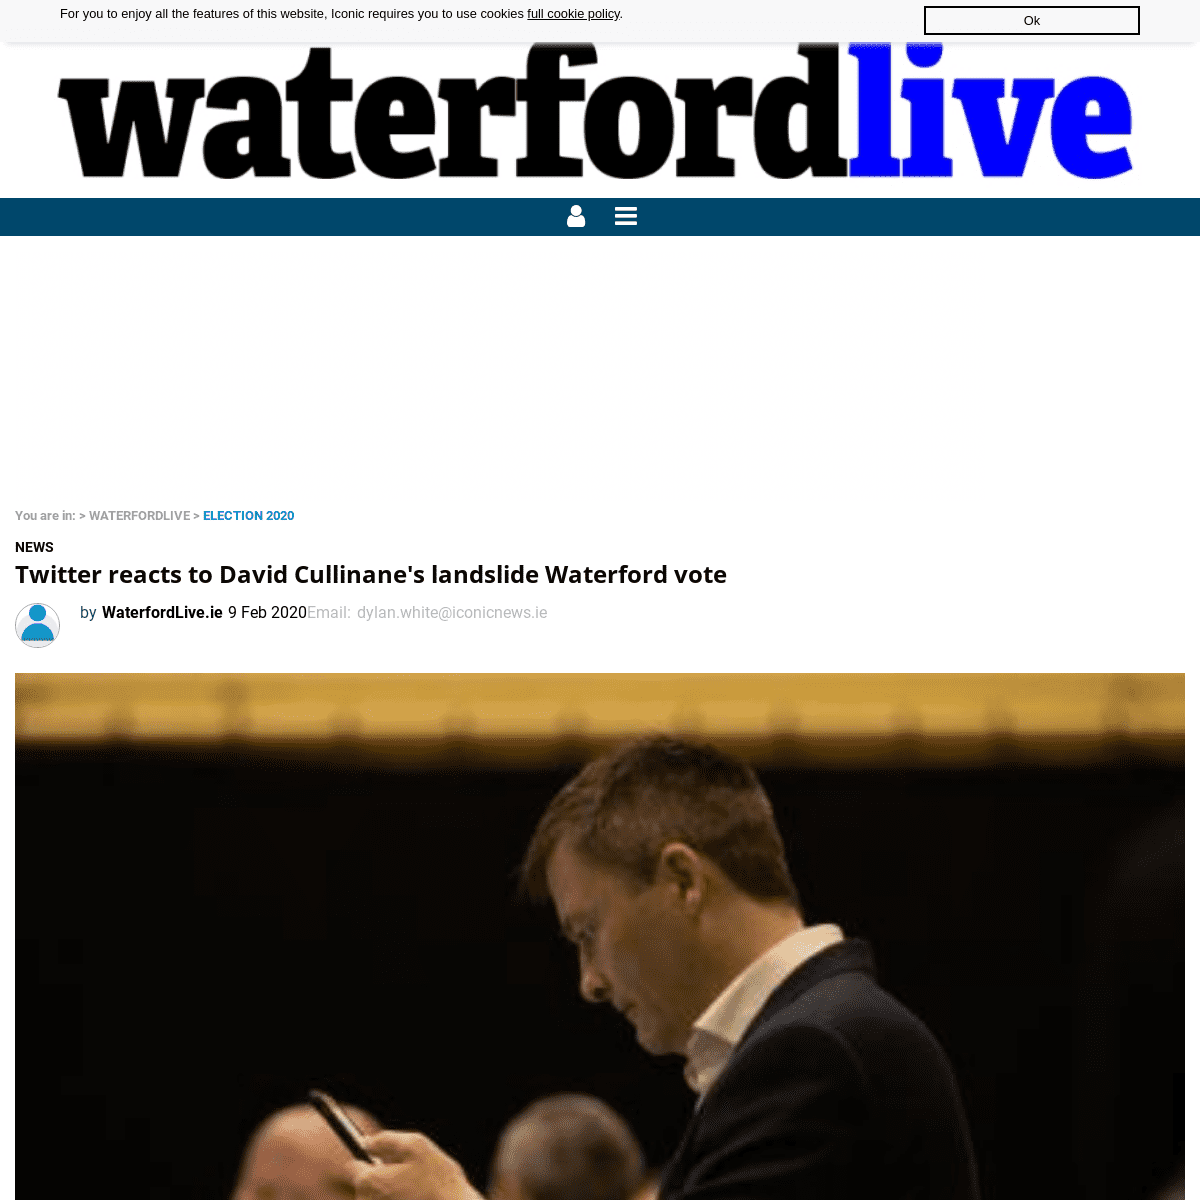 A complete backup of www.waterfordlive.ie/news/election-2020/515860/twitter-reacts-to-david-cullinane-s-landslide-waterford-vote